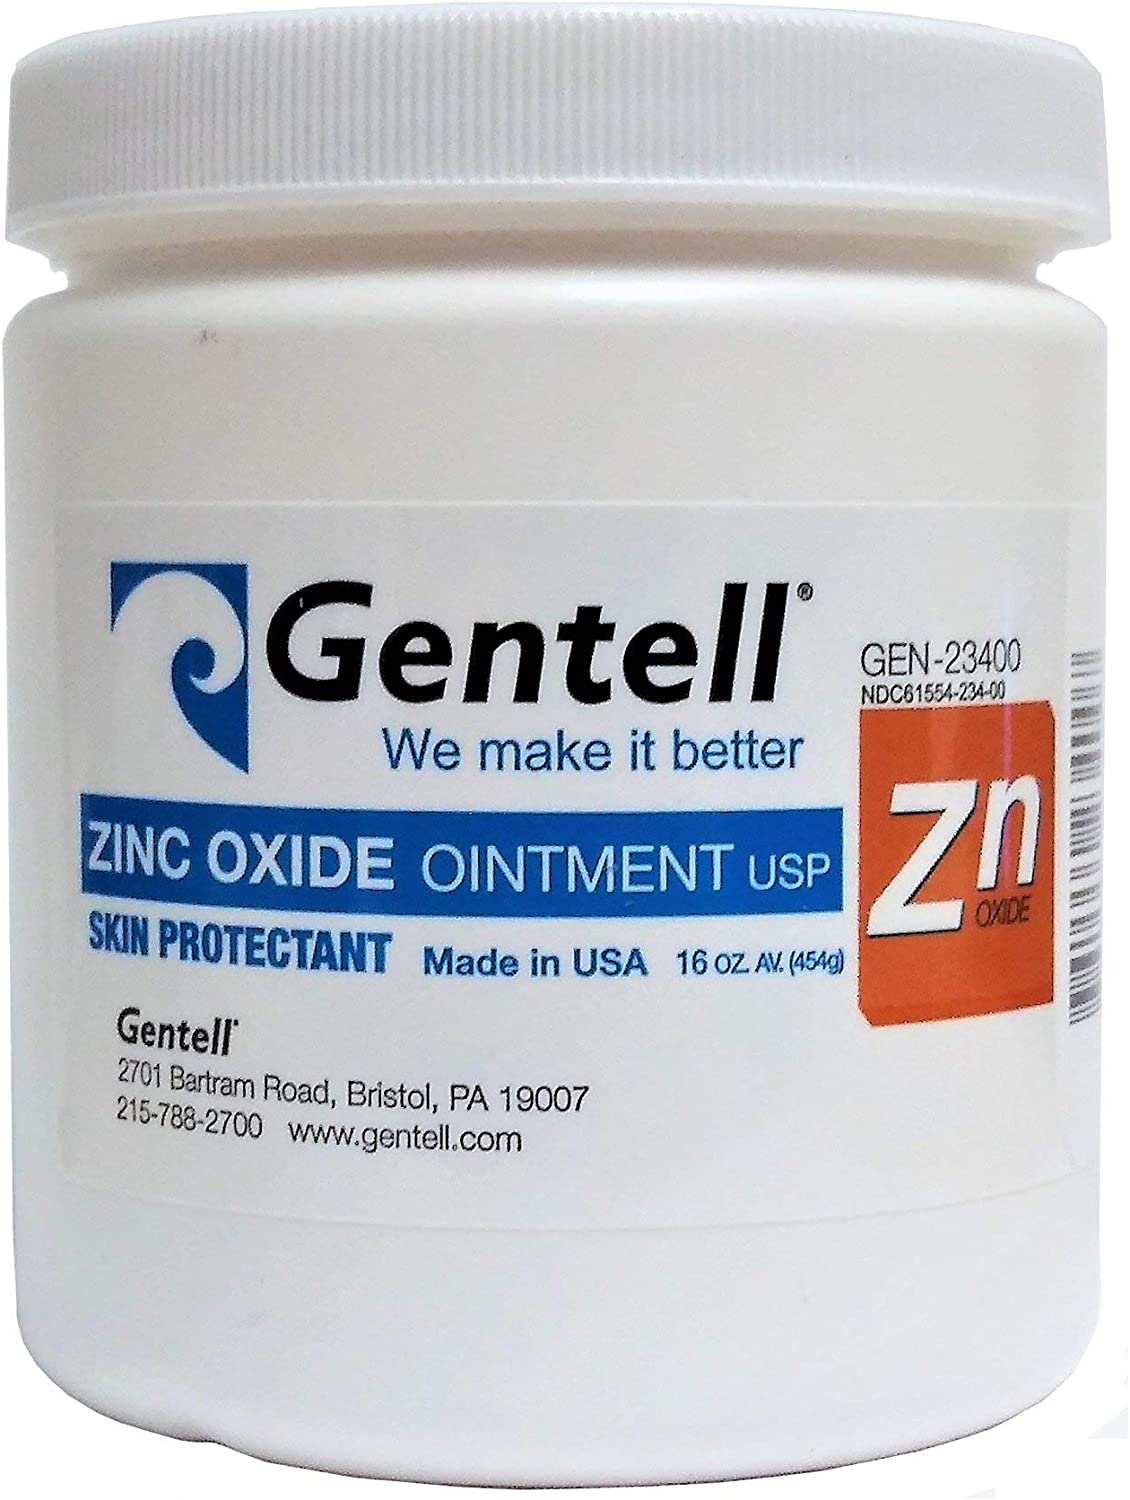 Gentell A&D + E Ointment Choose 2oz or 4oz Tube. Made in the USA